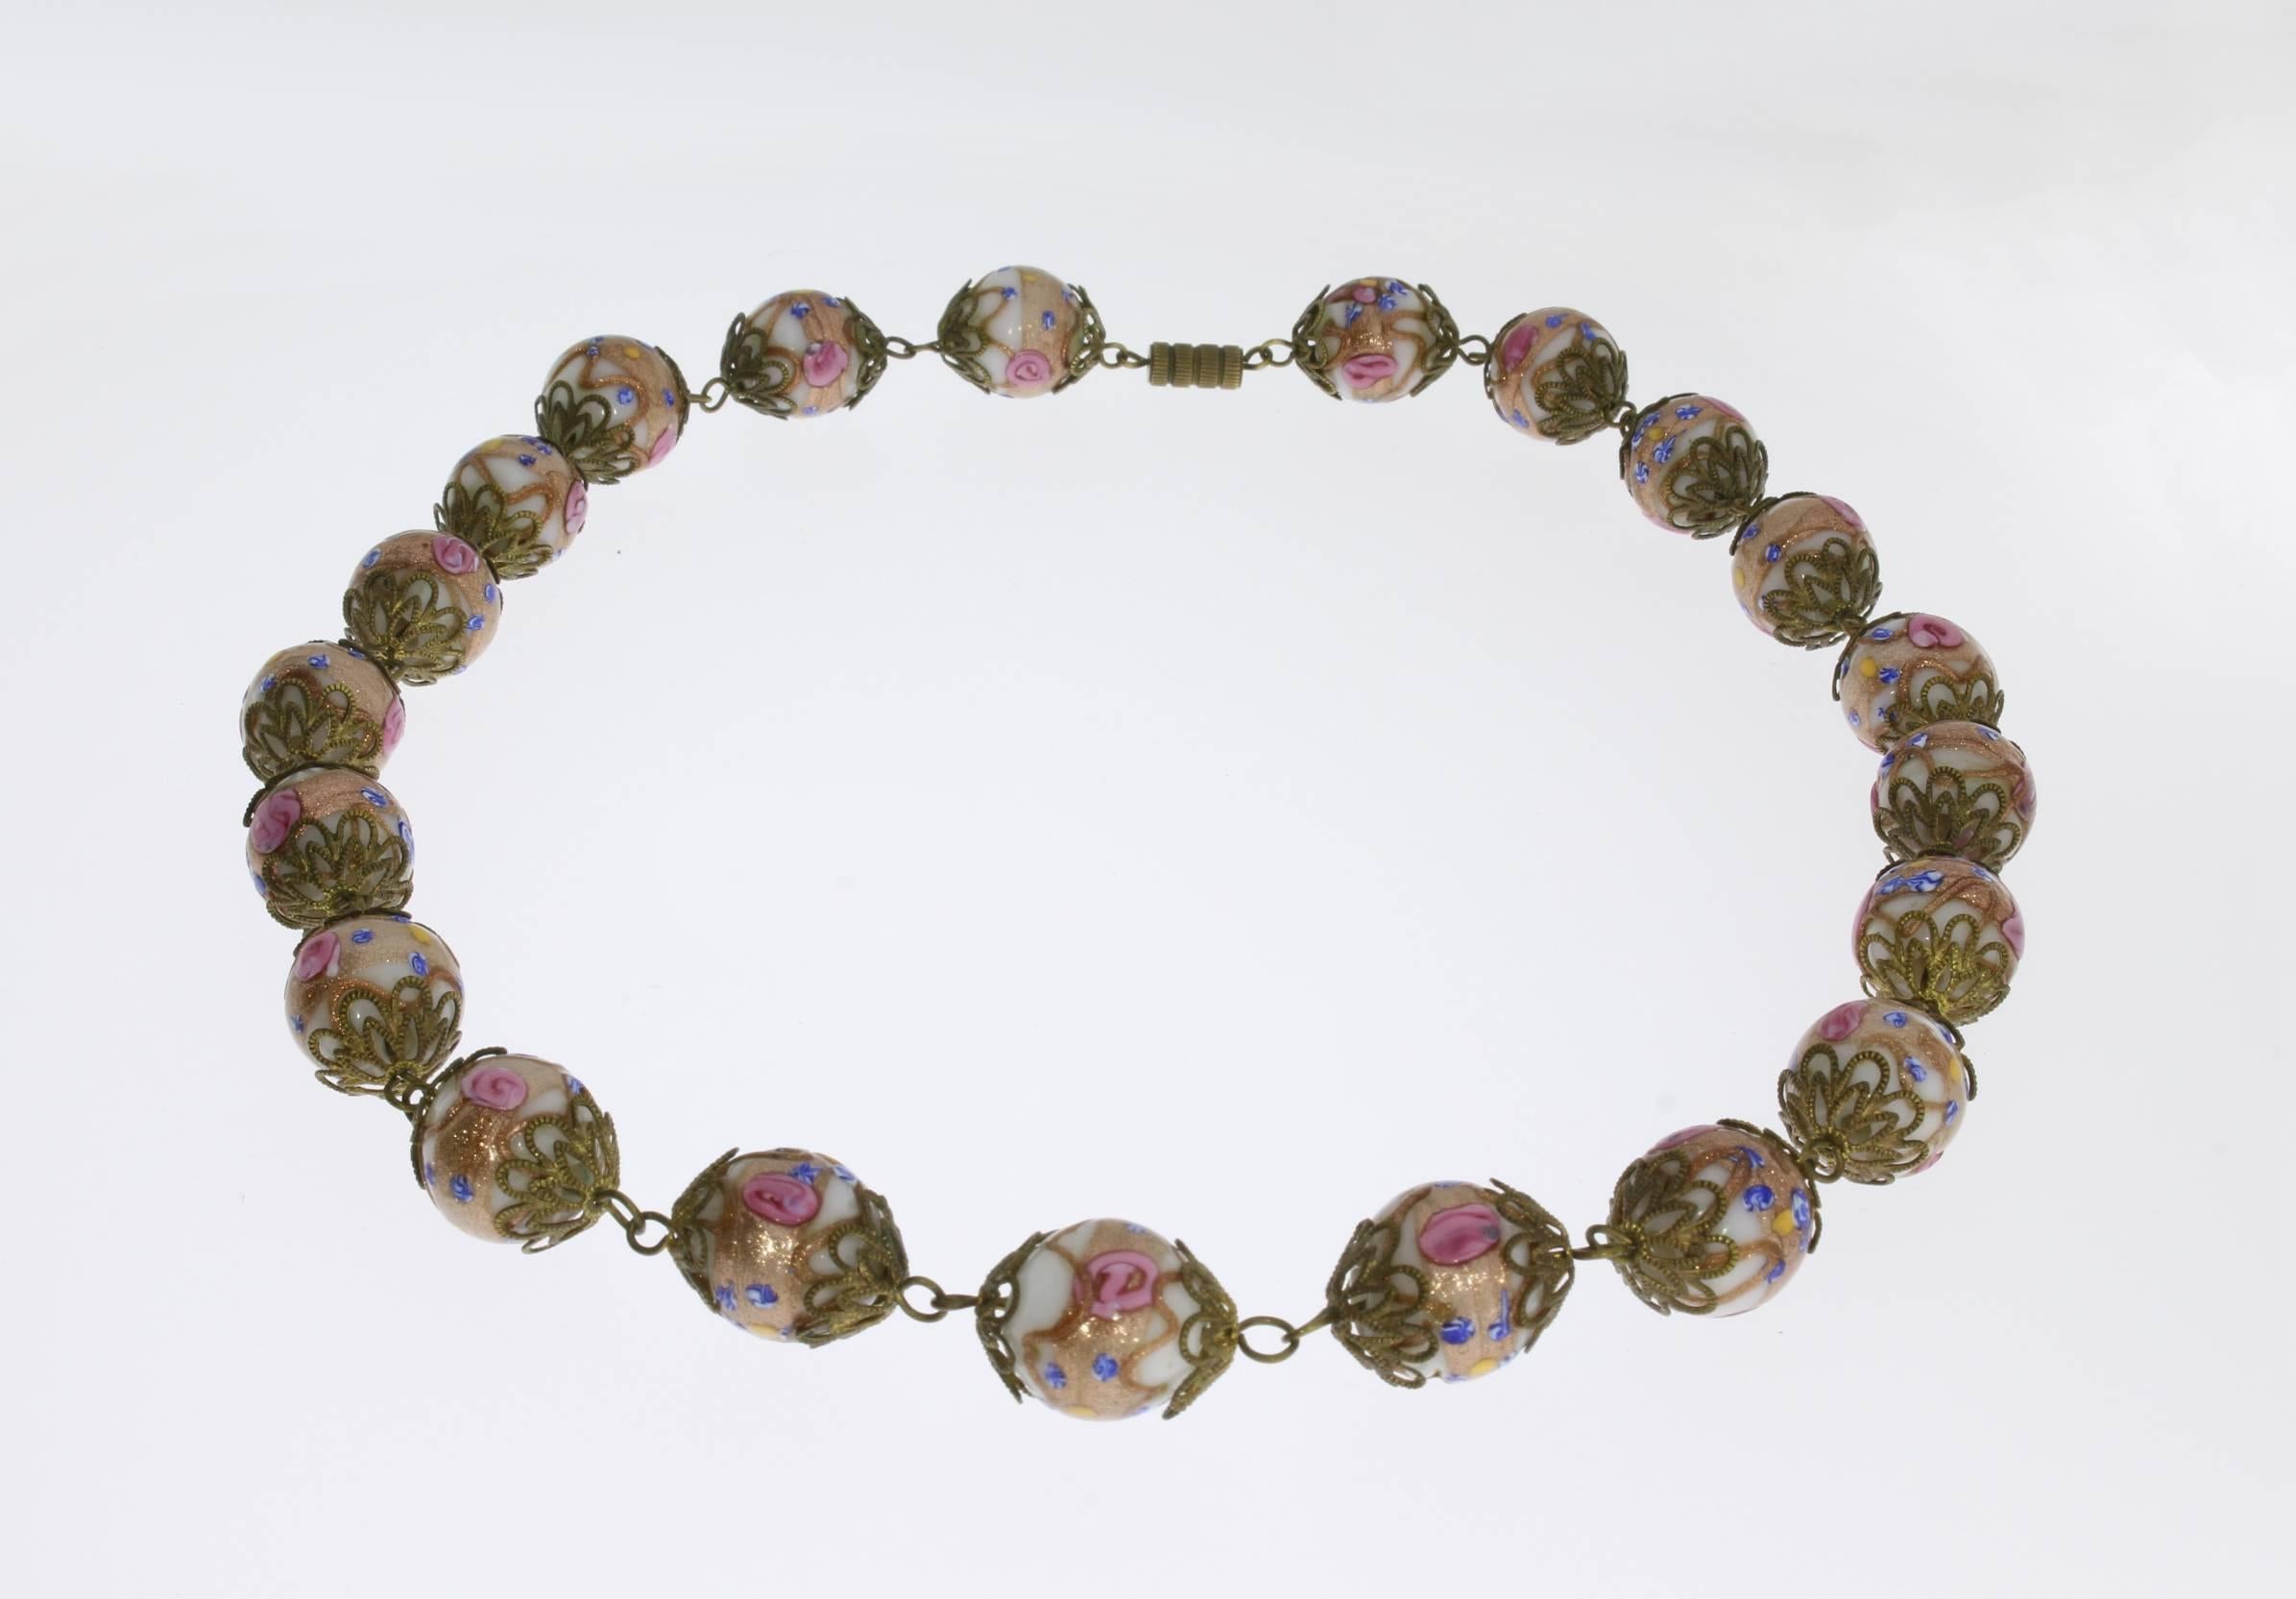 Original collector's item. Handcrafted.
Murano, Italy around 1930-1940. With 21 glass beads in white, gold, yellow, pink and blue. In lampwork technique ( millefiori ). Each bead decorated by metal-rosette. The diameter of each bead is approx. 0.63